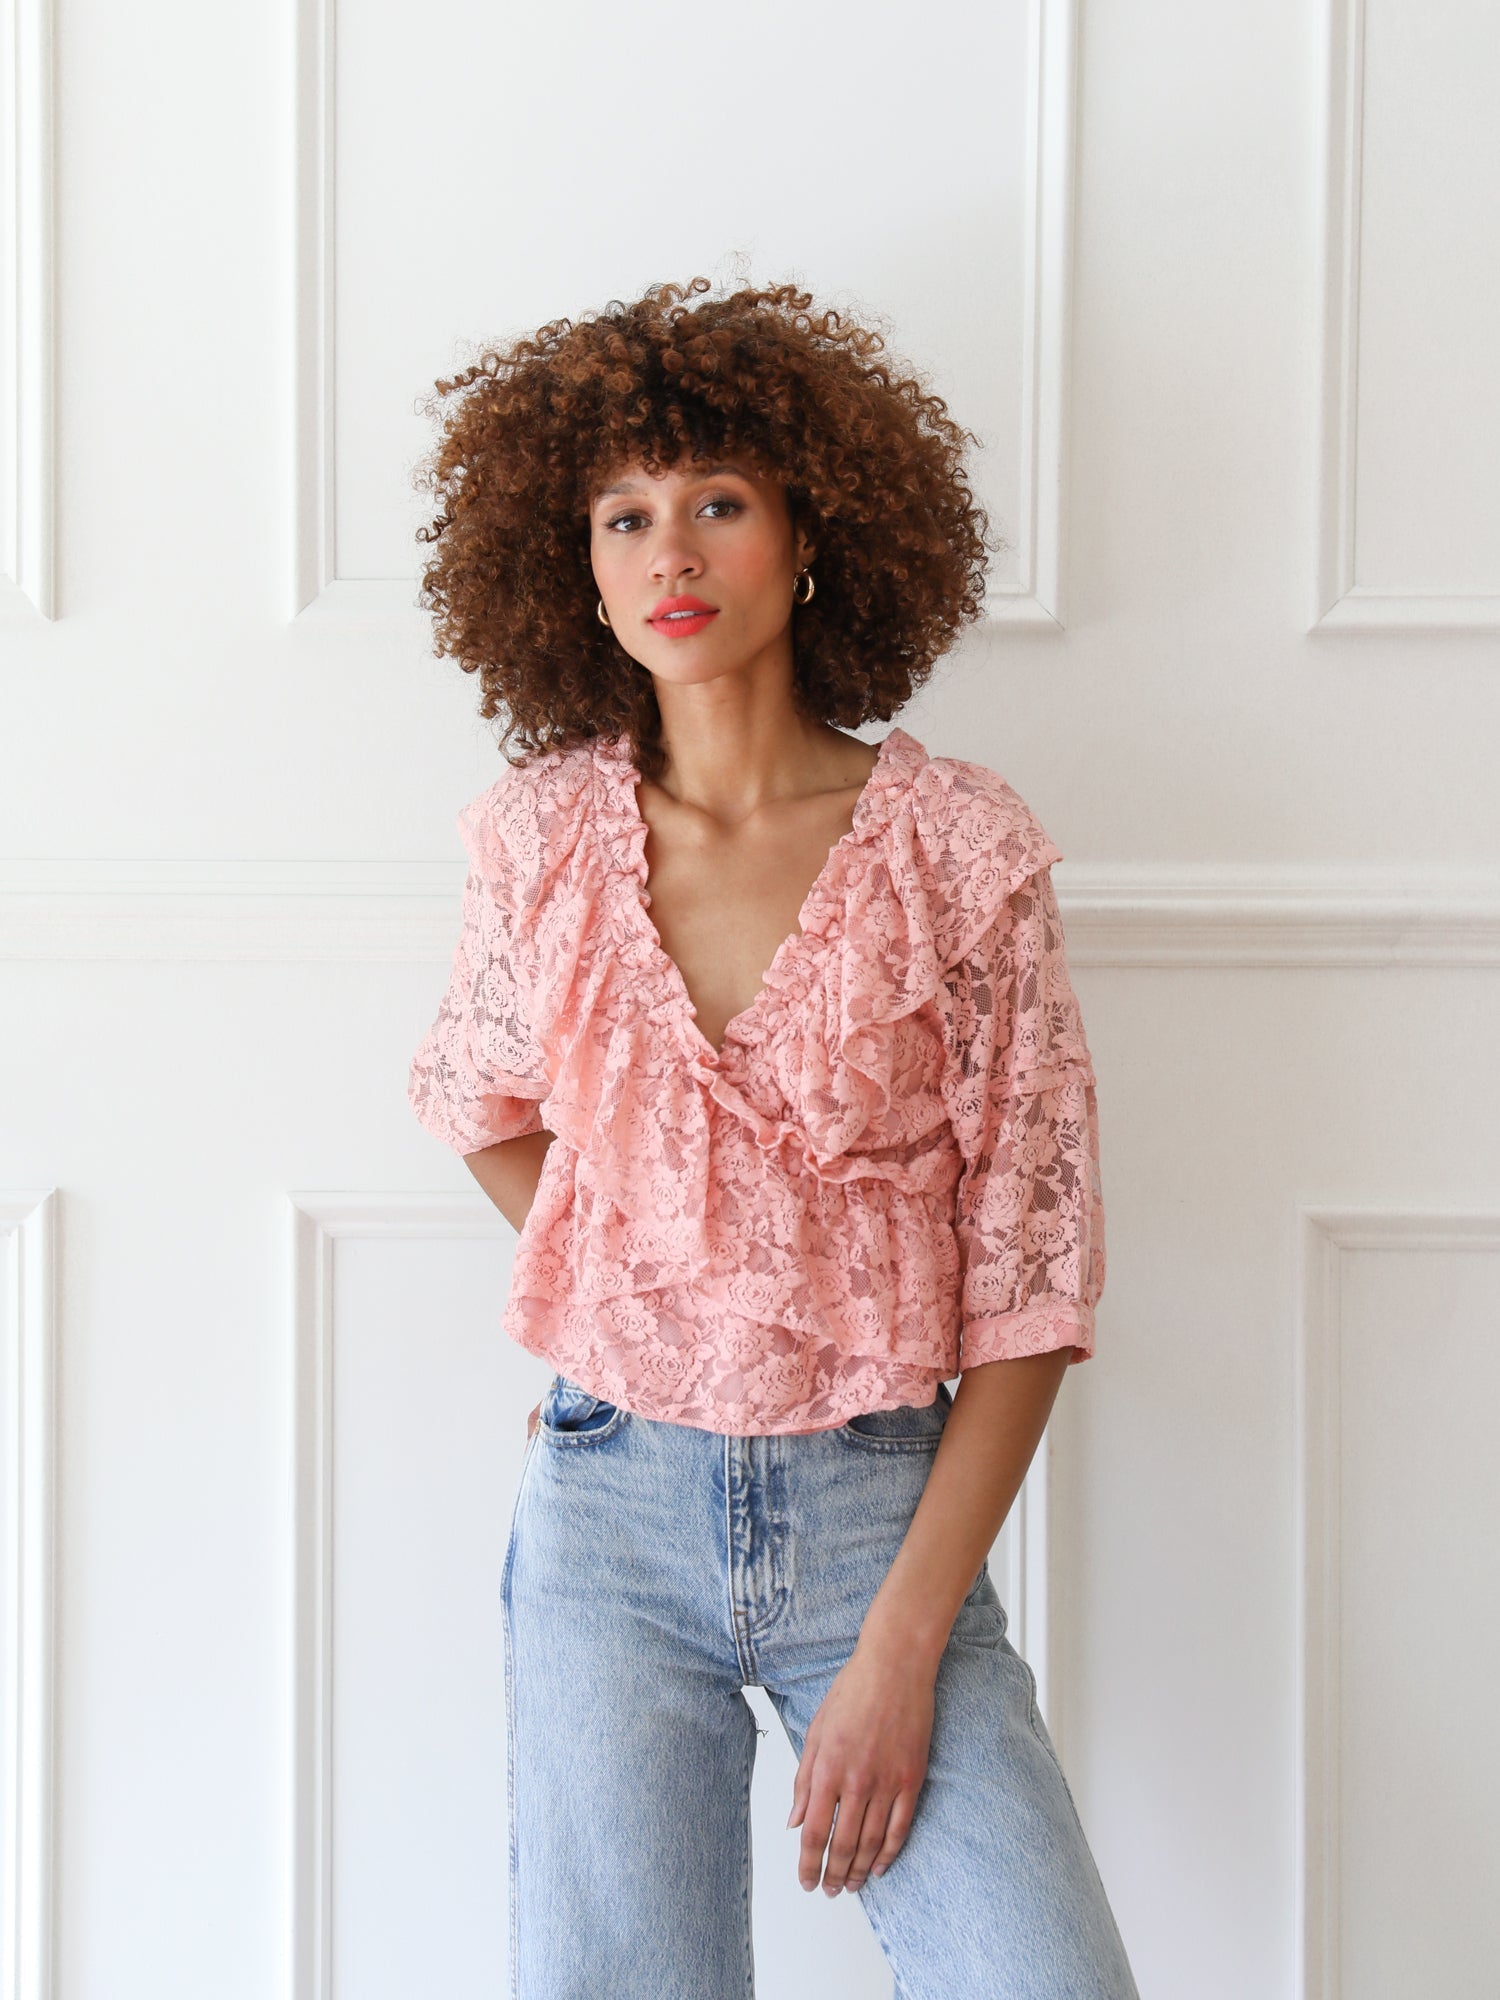 MILLE Clothing Isabella Top in Blush Lace